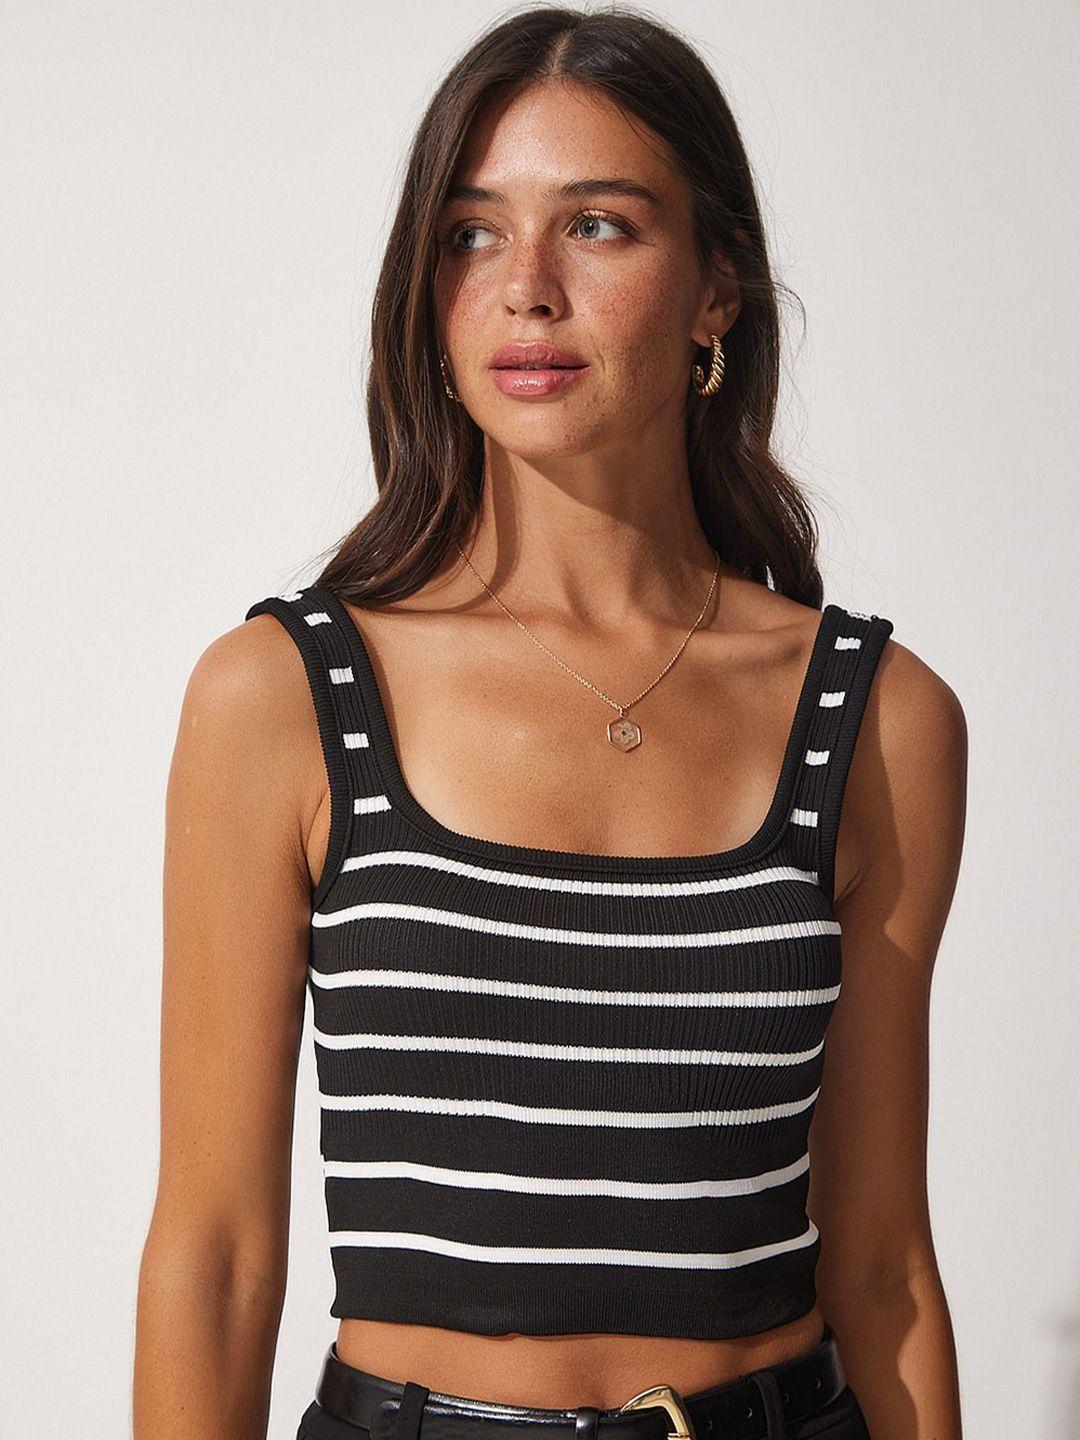 happiness istanbul horizontal striped shoulder straps monochrome fitted crop top